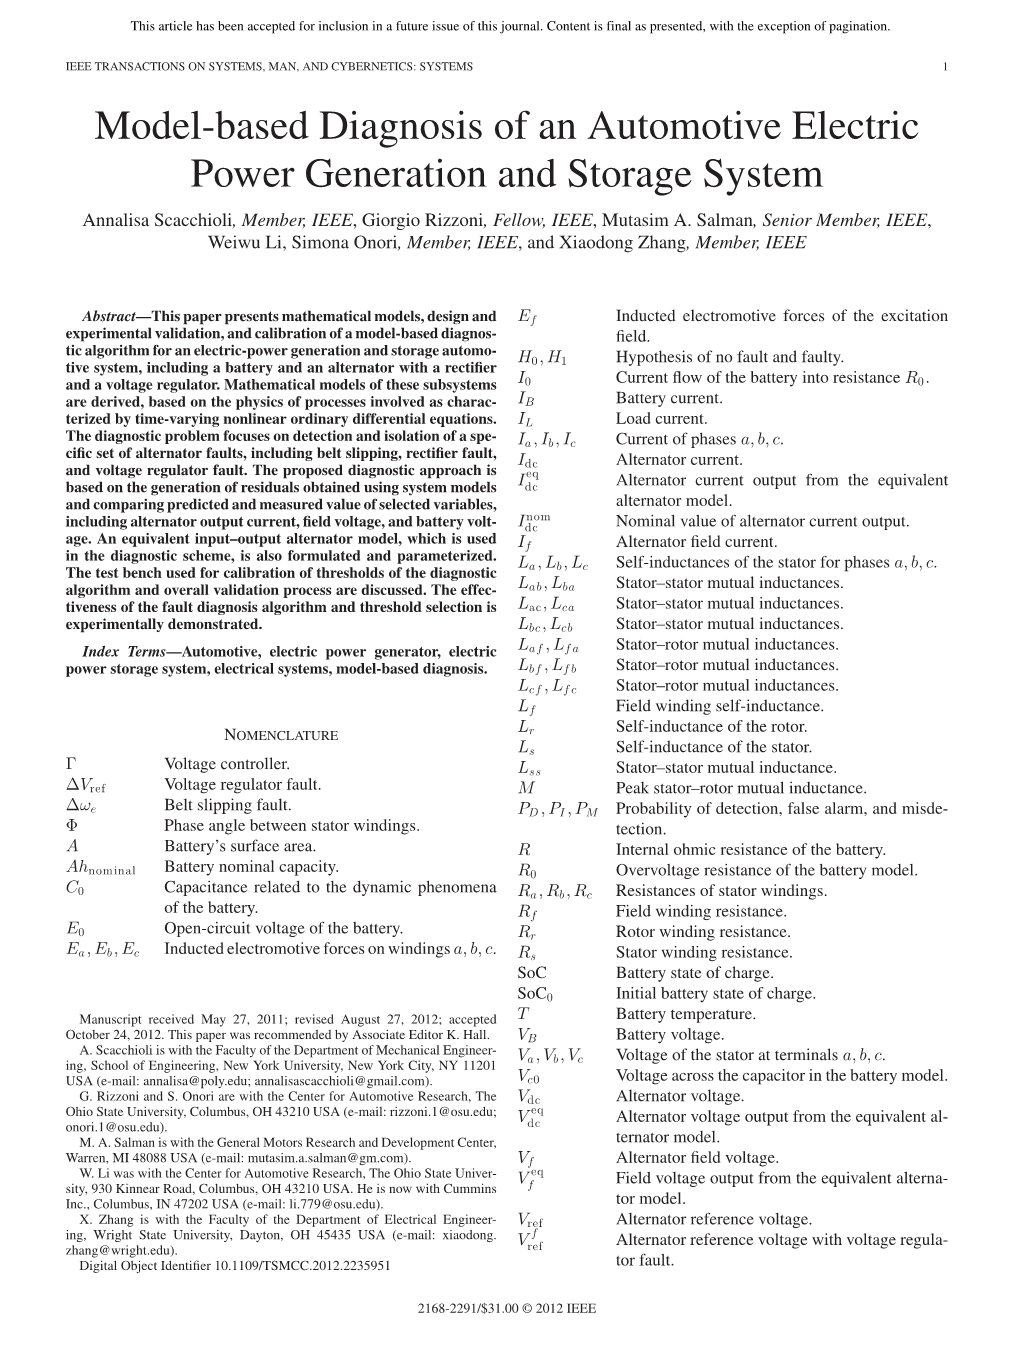 Model-Based Diagnosis of an Automotive Electric Power Generation and Storage System Annalisa Scacchioli, Member, IEEE, Giorgio Rizzoni, Fellow, IEEE, Mutasim A